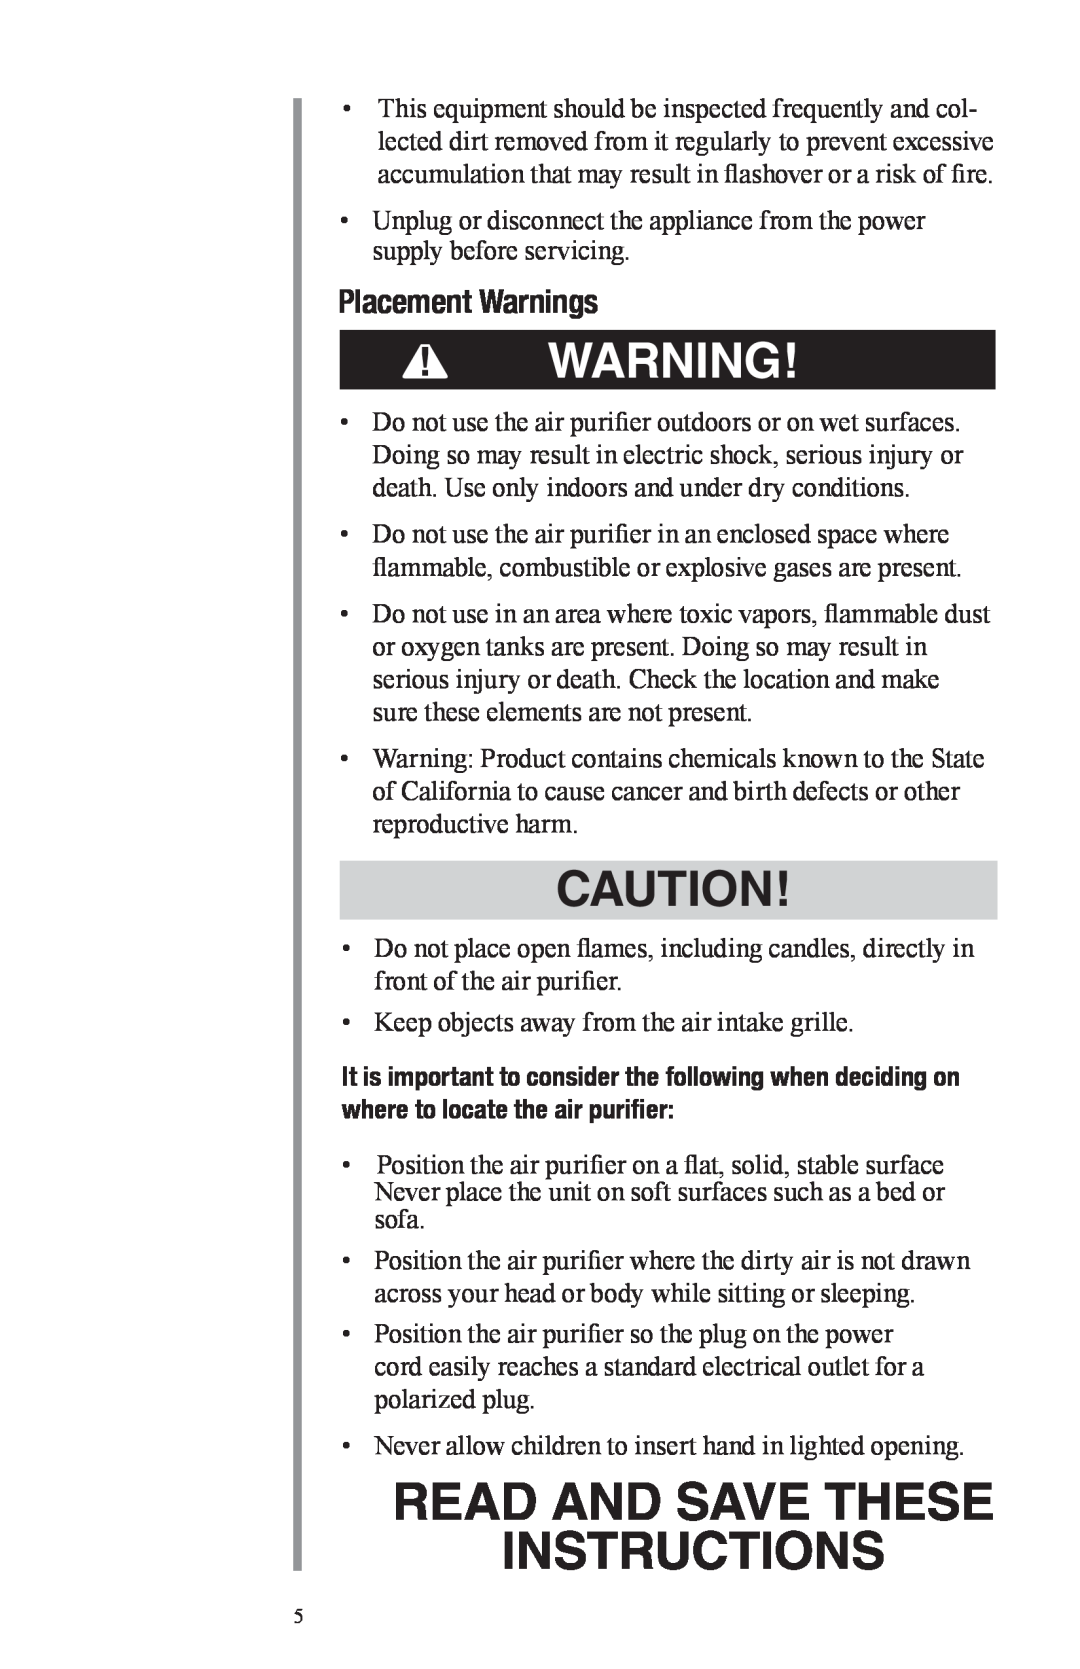 Oreck Air manual Placement Warnings, Read And Save These Instructions 